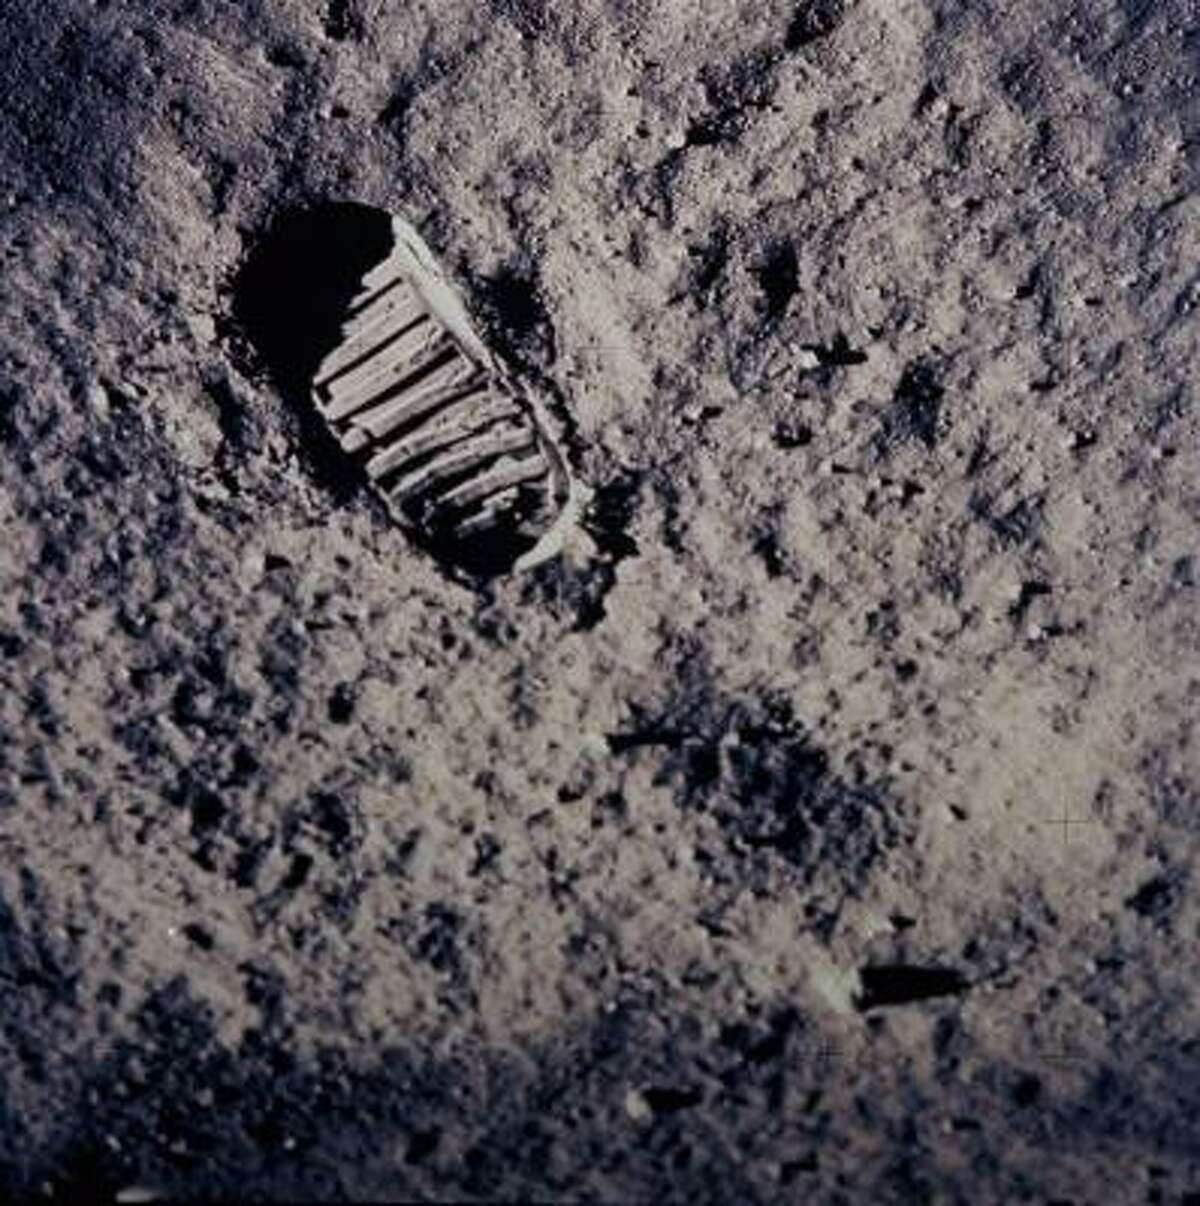 A footprint left by an Apollo 11 astronaut sat on the surface of the moon in 1969.